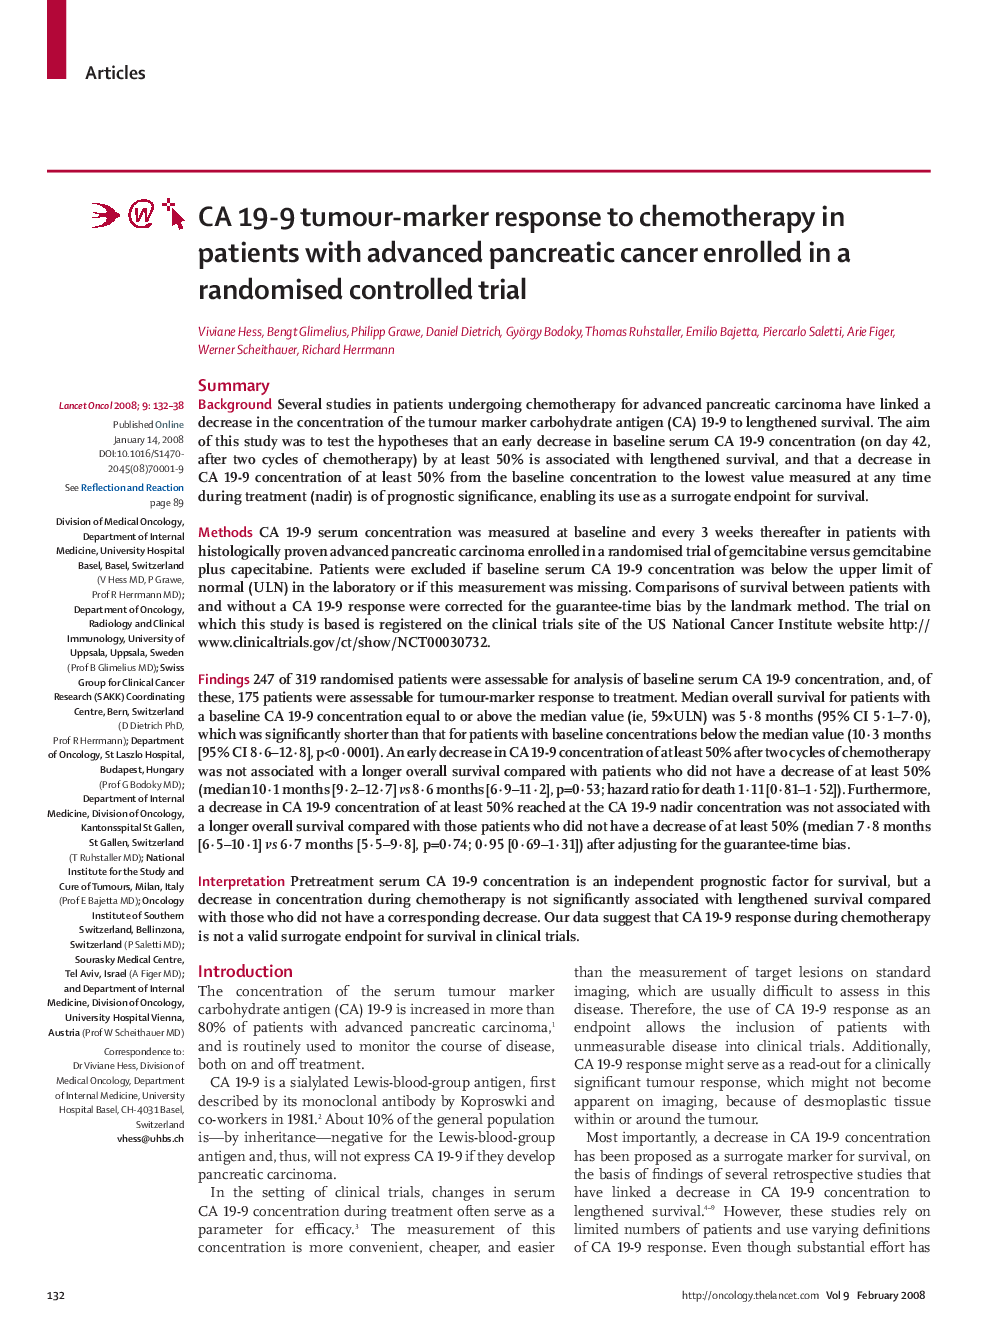 CA 19-9 tumour-marker response to chemotherapy in patients with advanced pancreatic cancer enrolled in a randomised controlled trial